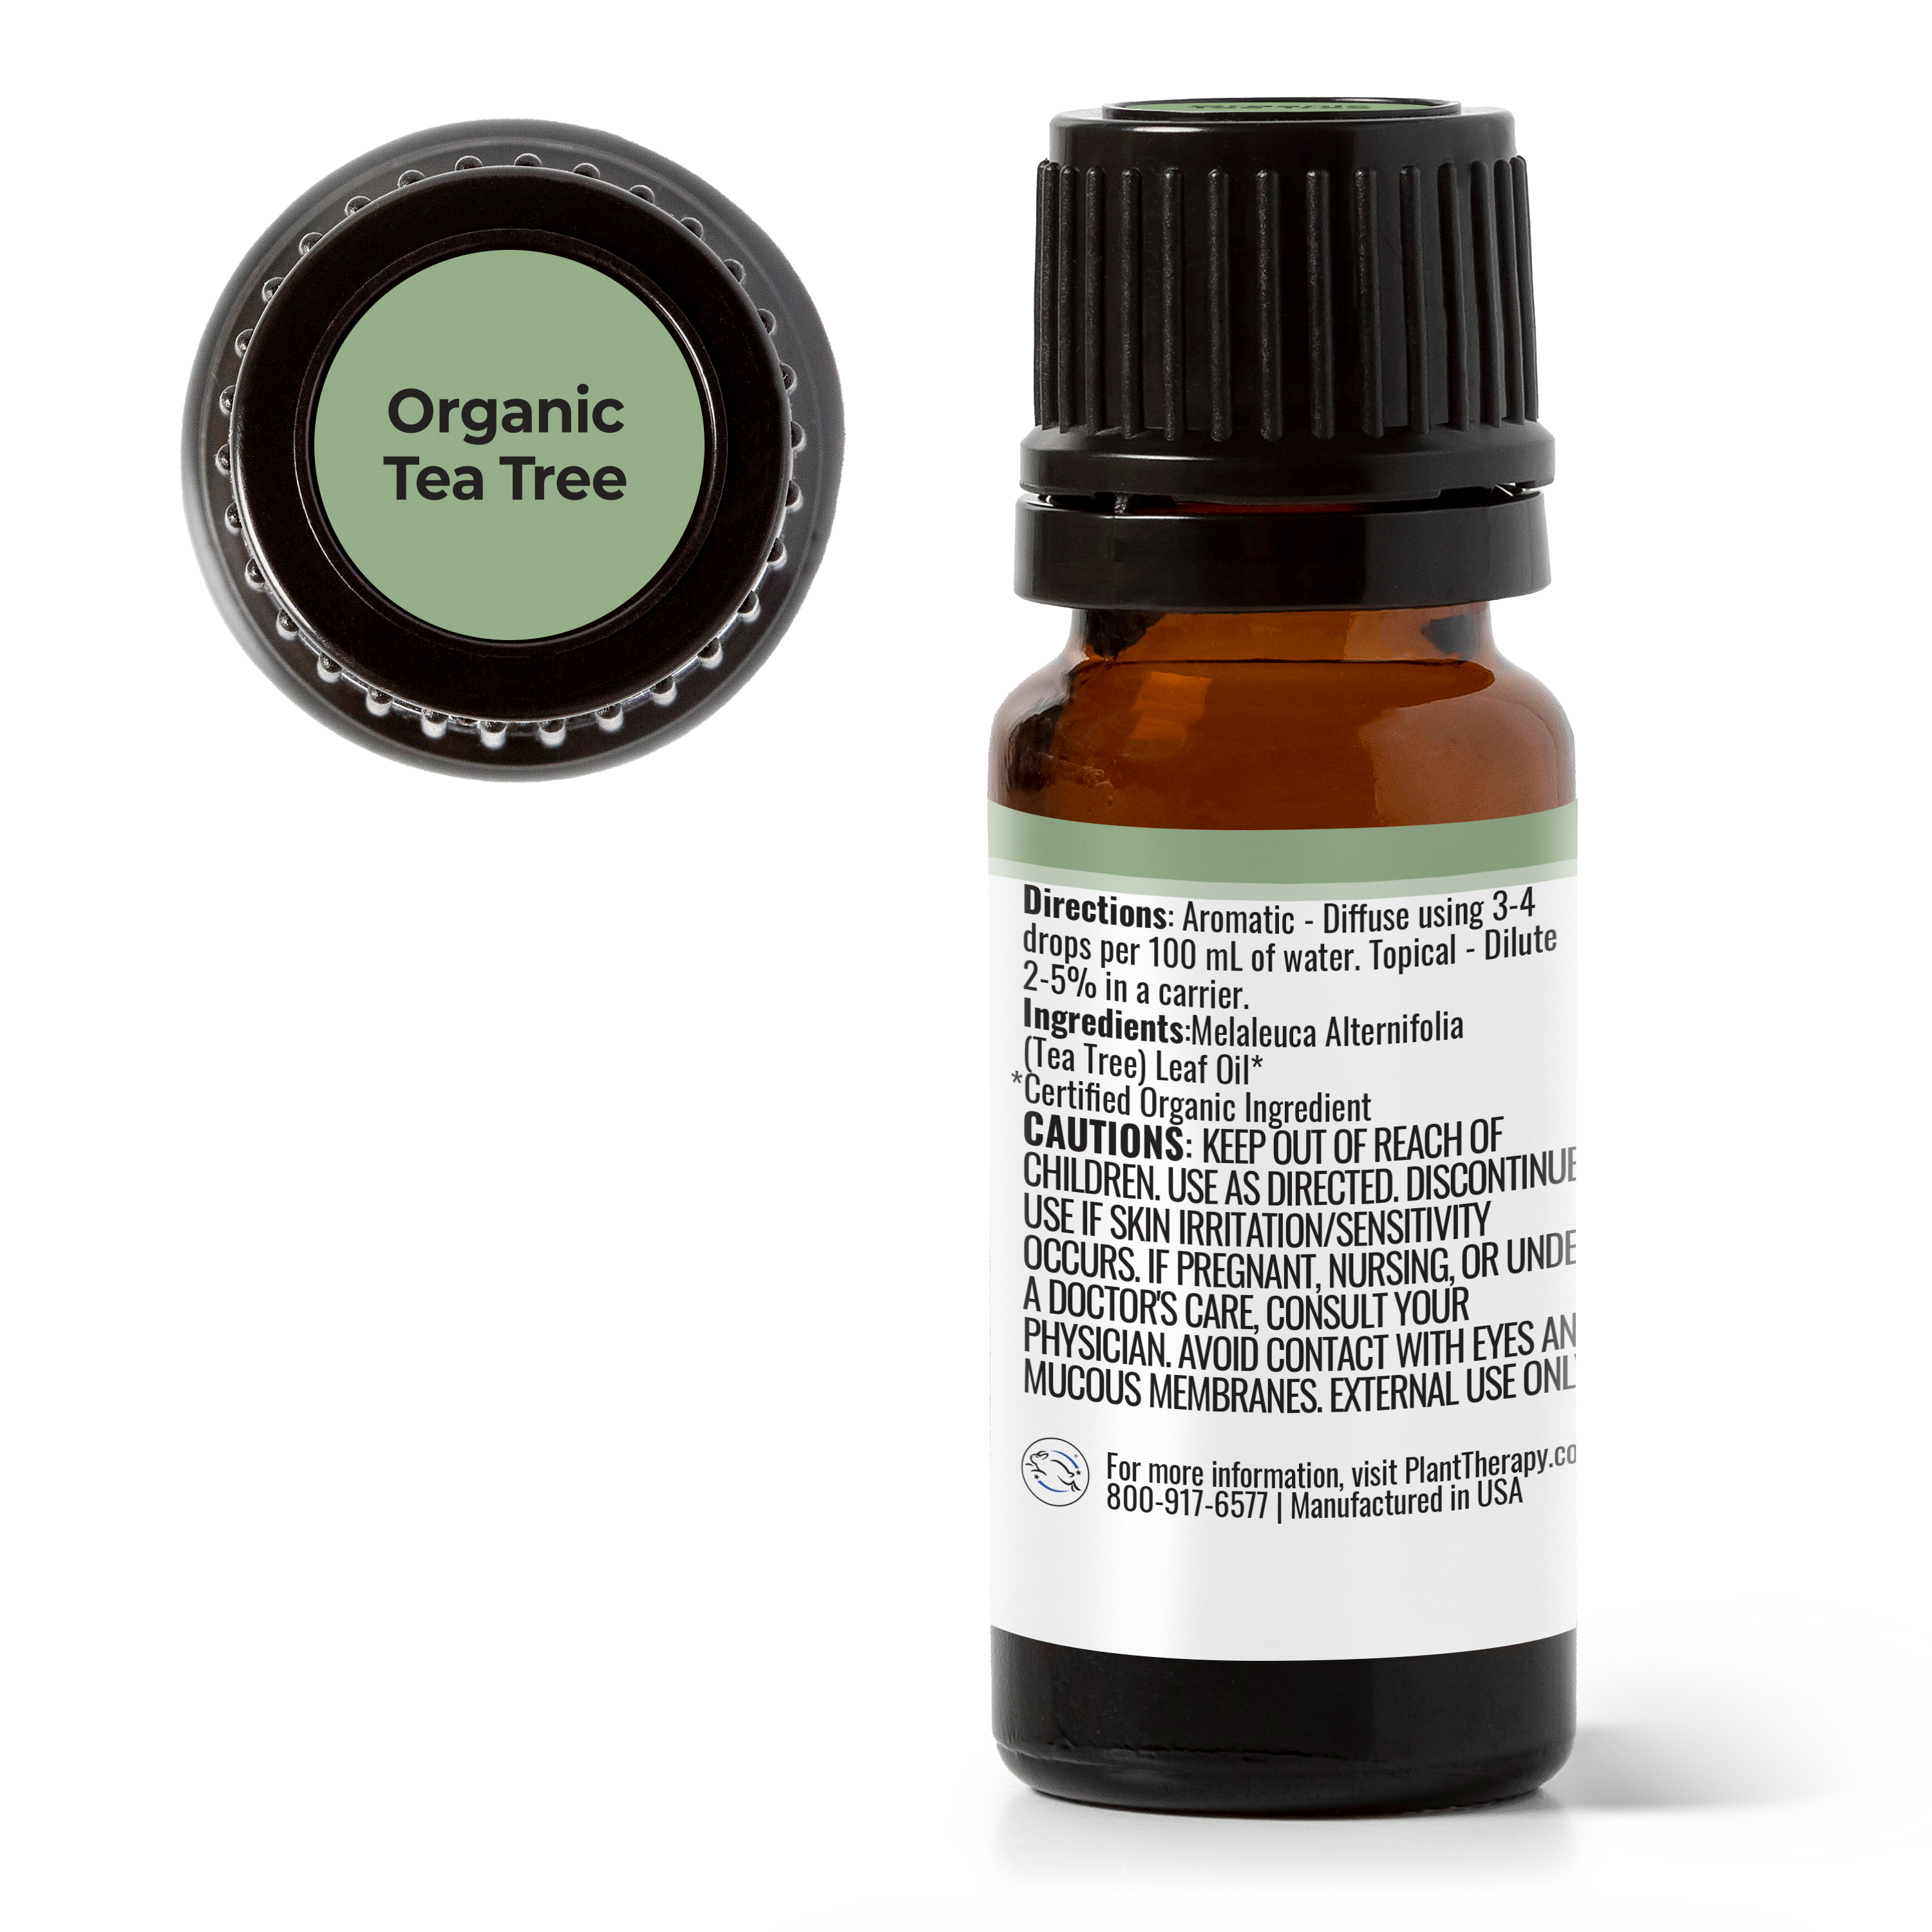 Plant Therapy Organic Tea Tree Oil (Melaleuca) 100% Pure, USDA Certified Organic, Undiluted, Natural Aromatherapy, Therapeutic Grade 10 mL (1/3 oz) - image 2 of 7